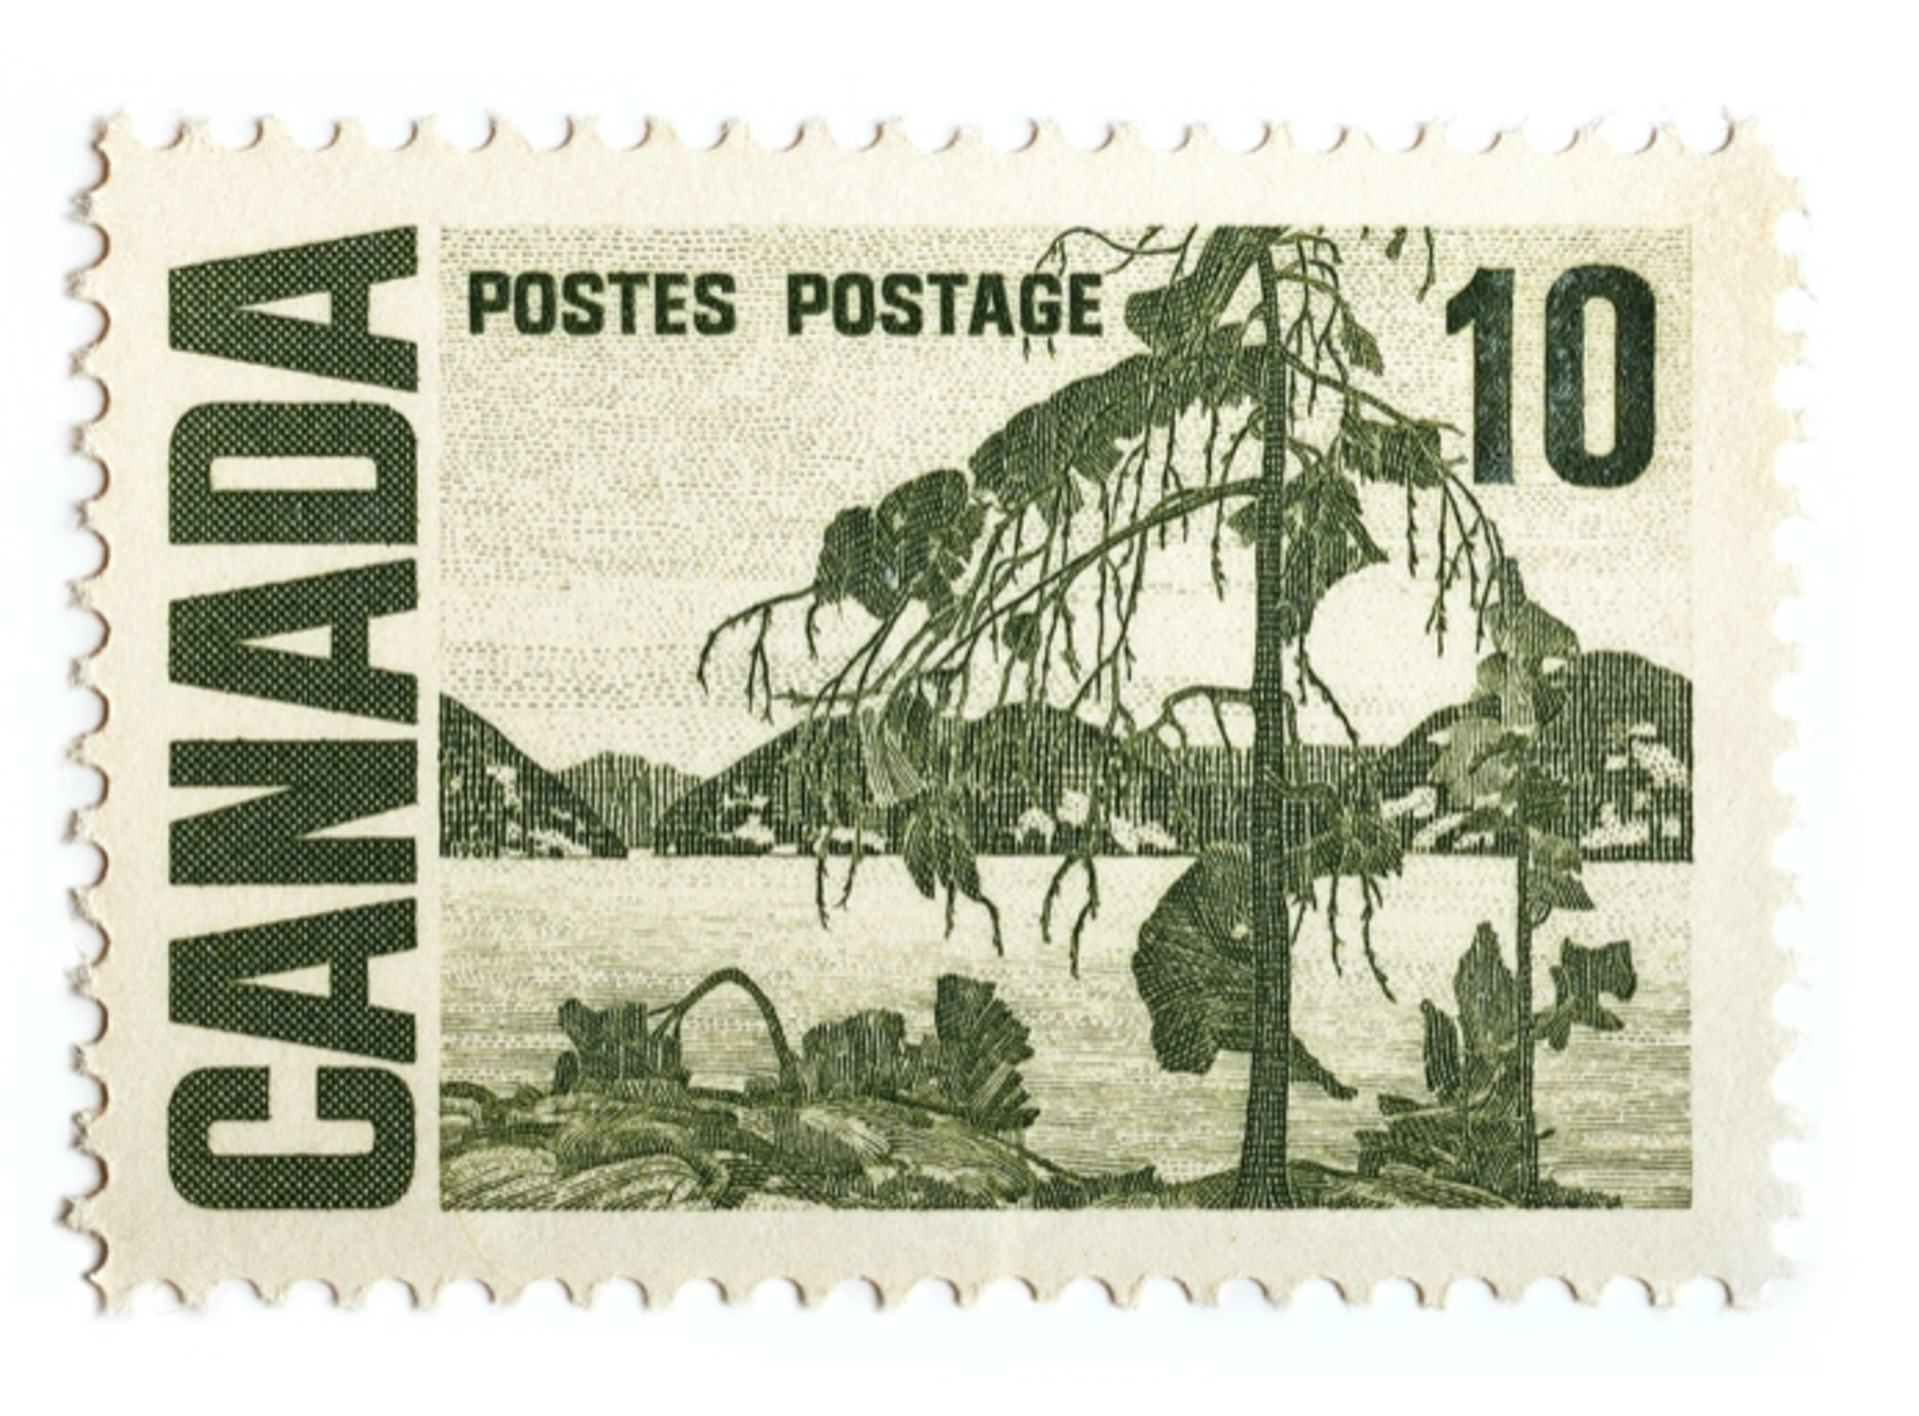 Canada Stamp 10 Cents by Peter Andrew Lusztyk | Collectibles